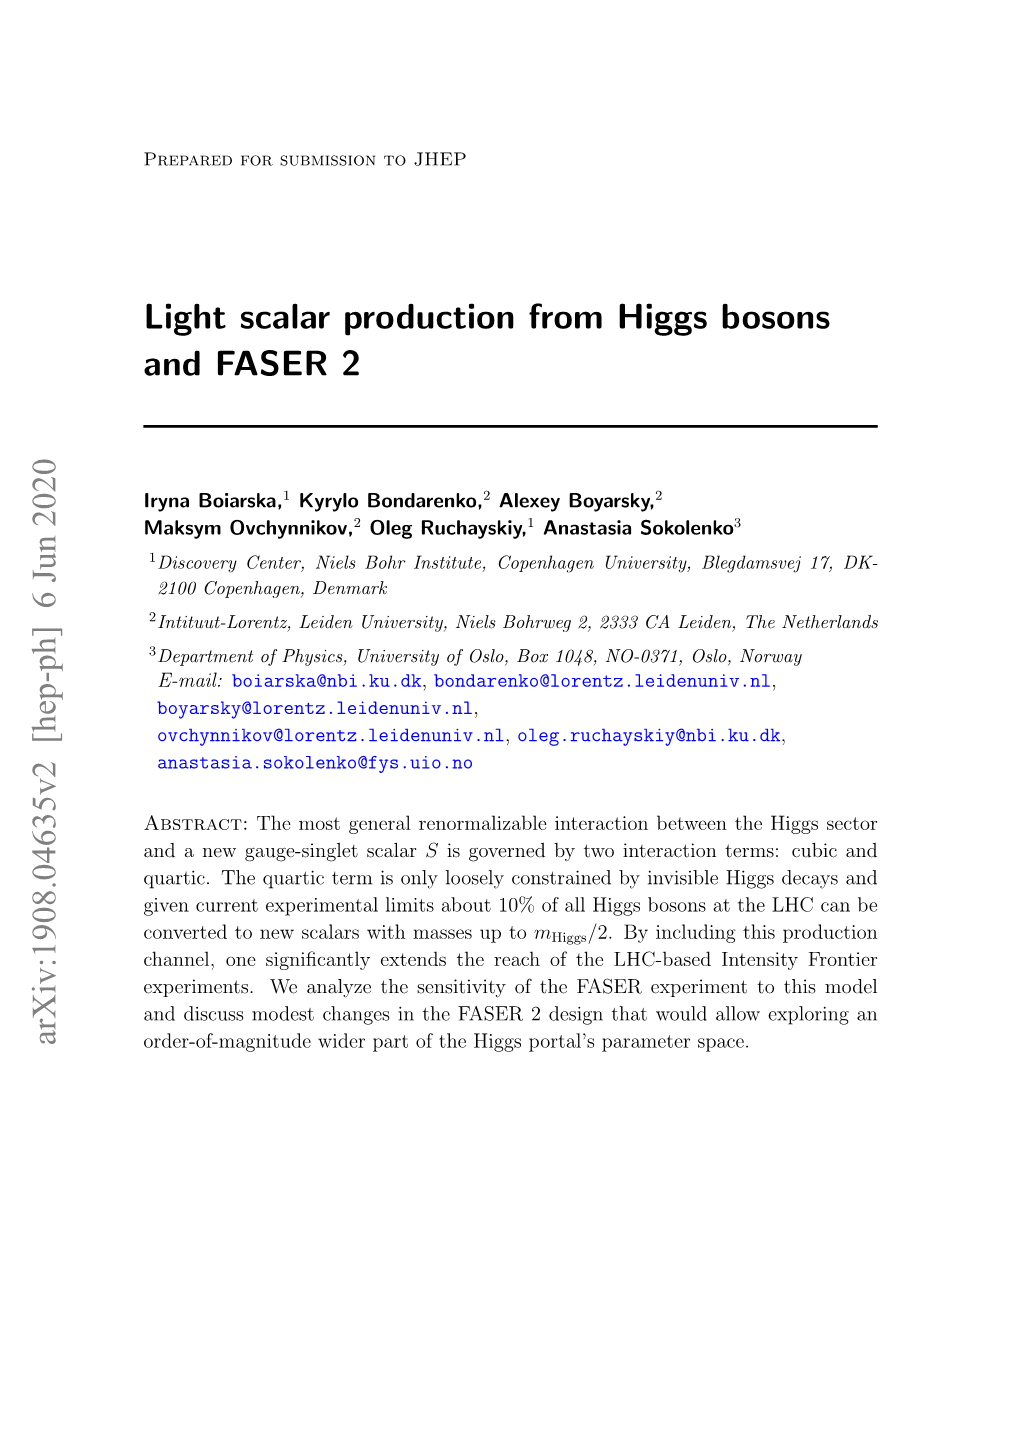 Light Scalar Production from Higgs Bosons and FASER 2